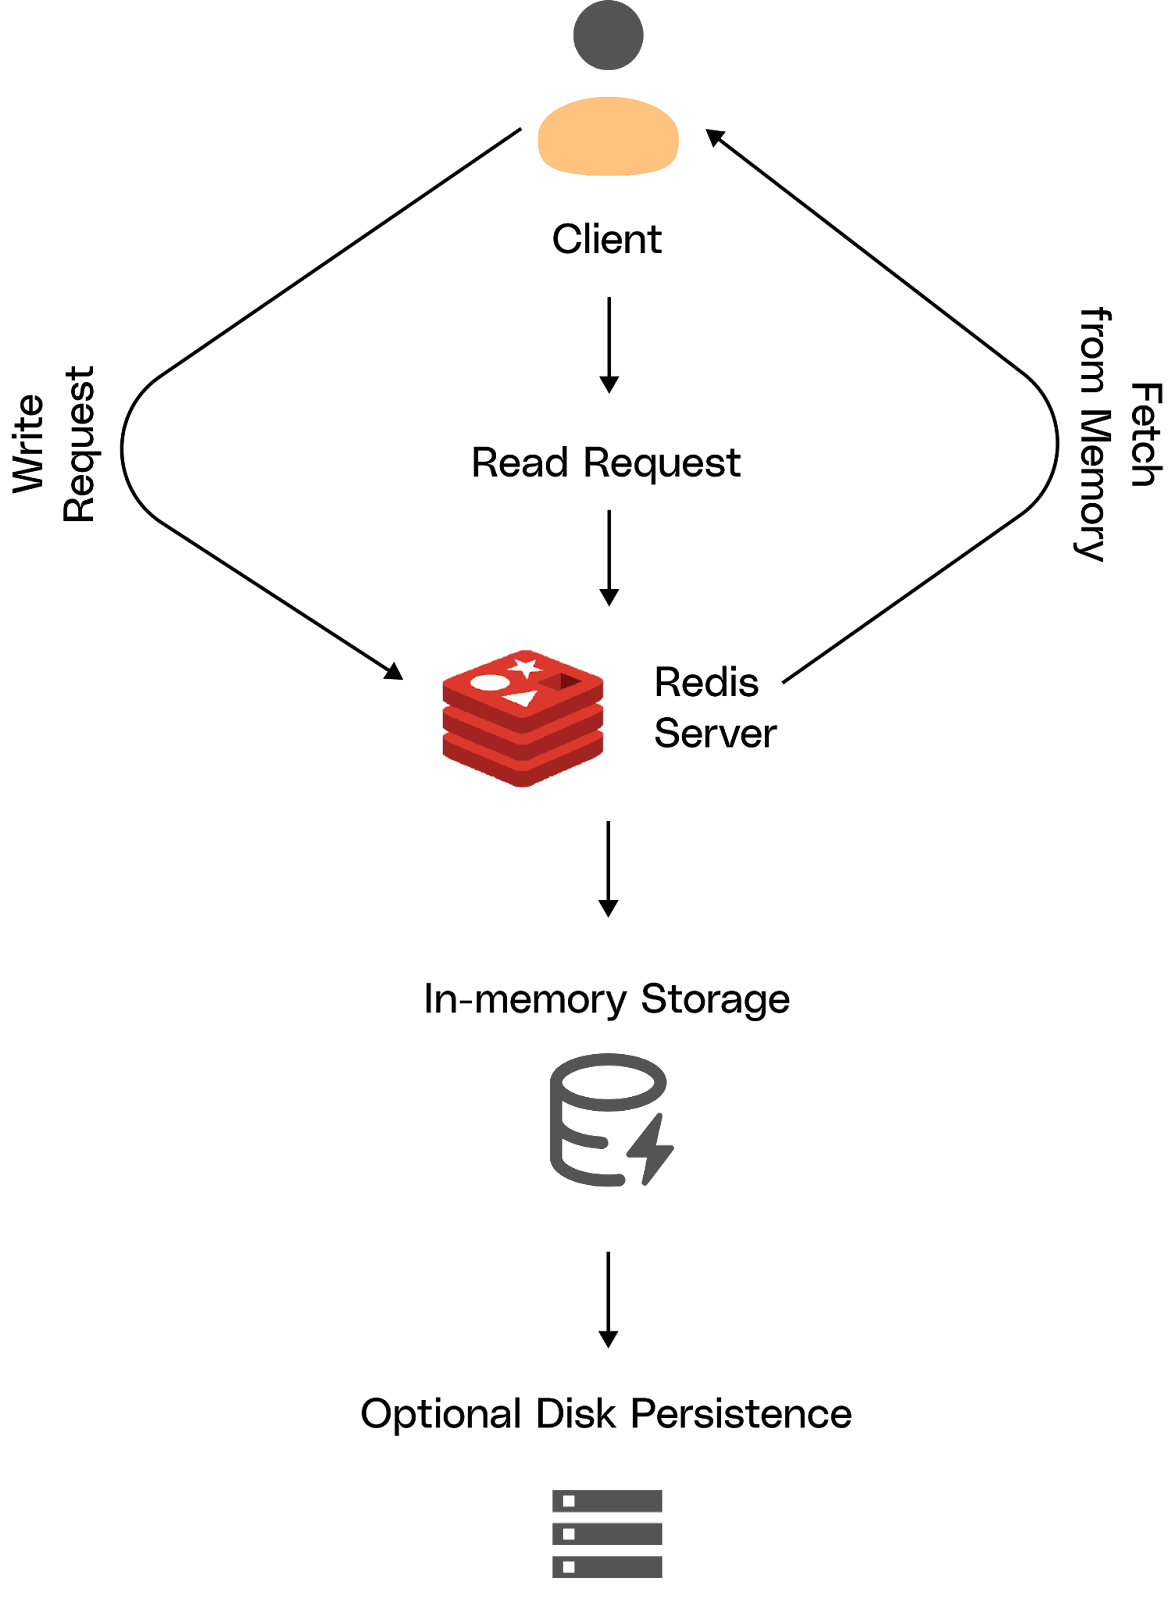 Redis is an in-memory data store